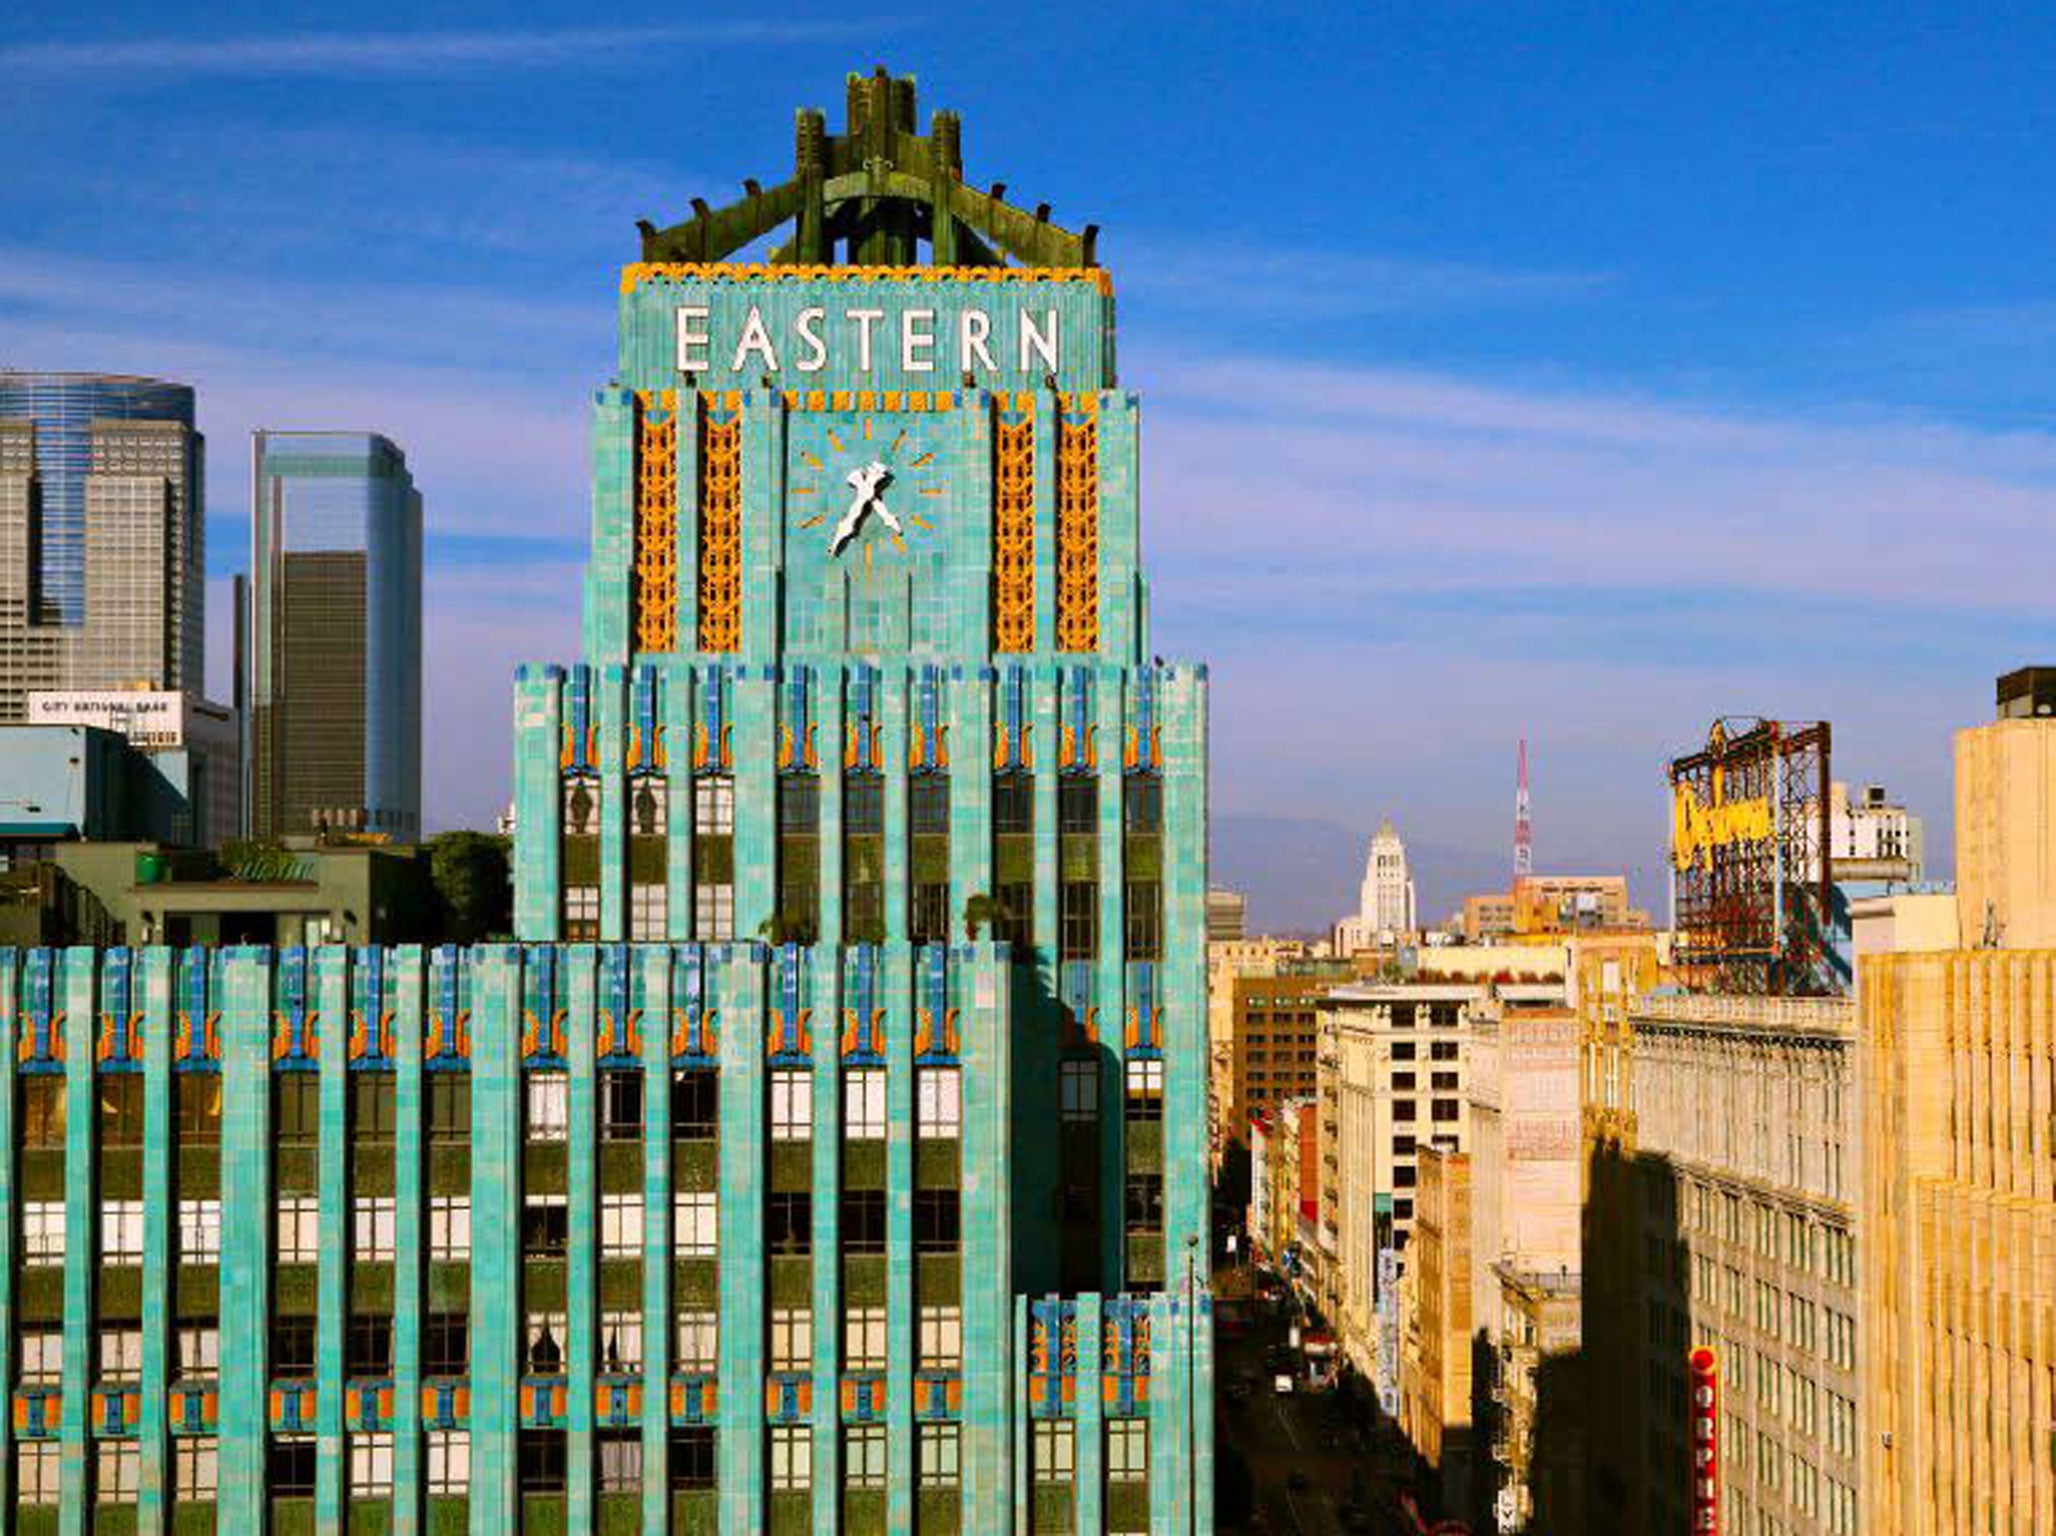 The Eastern Columbia building